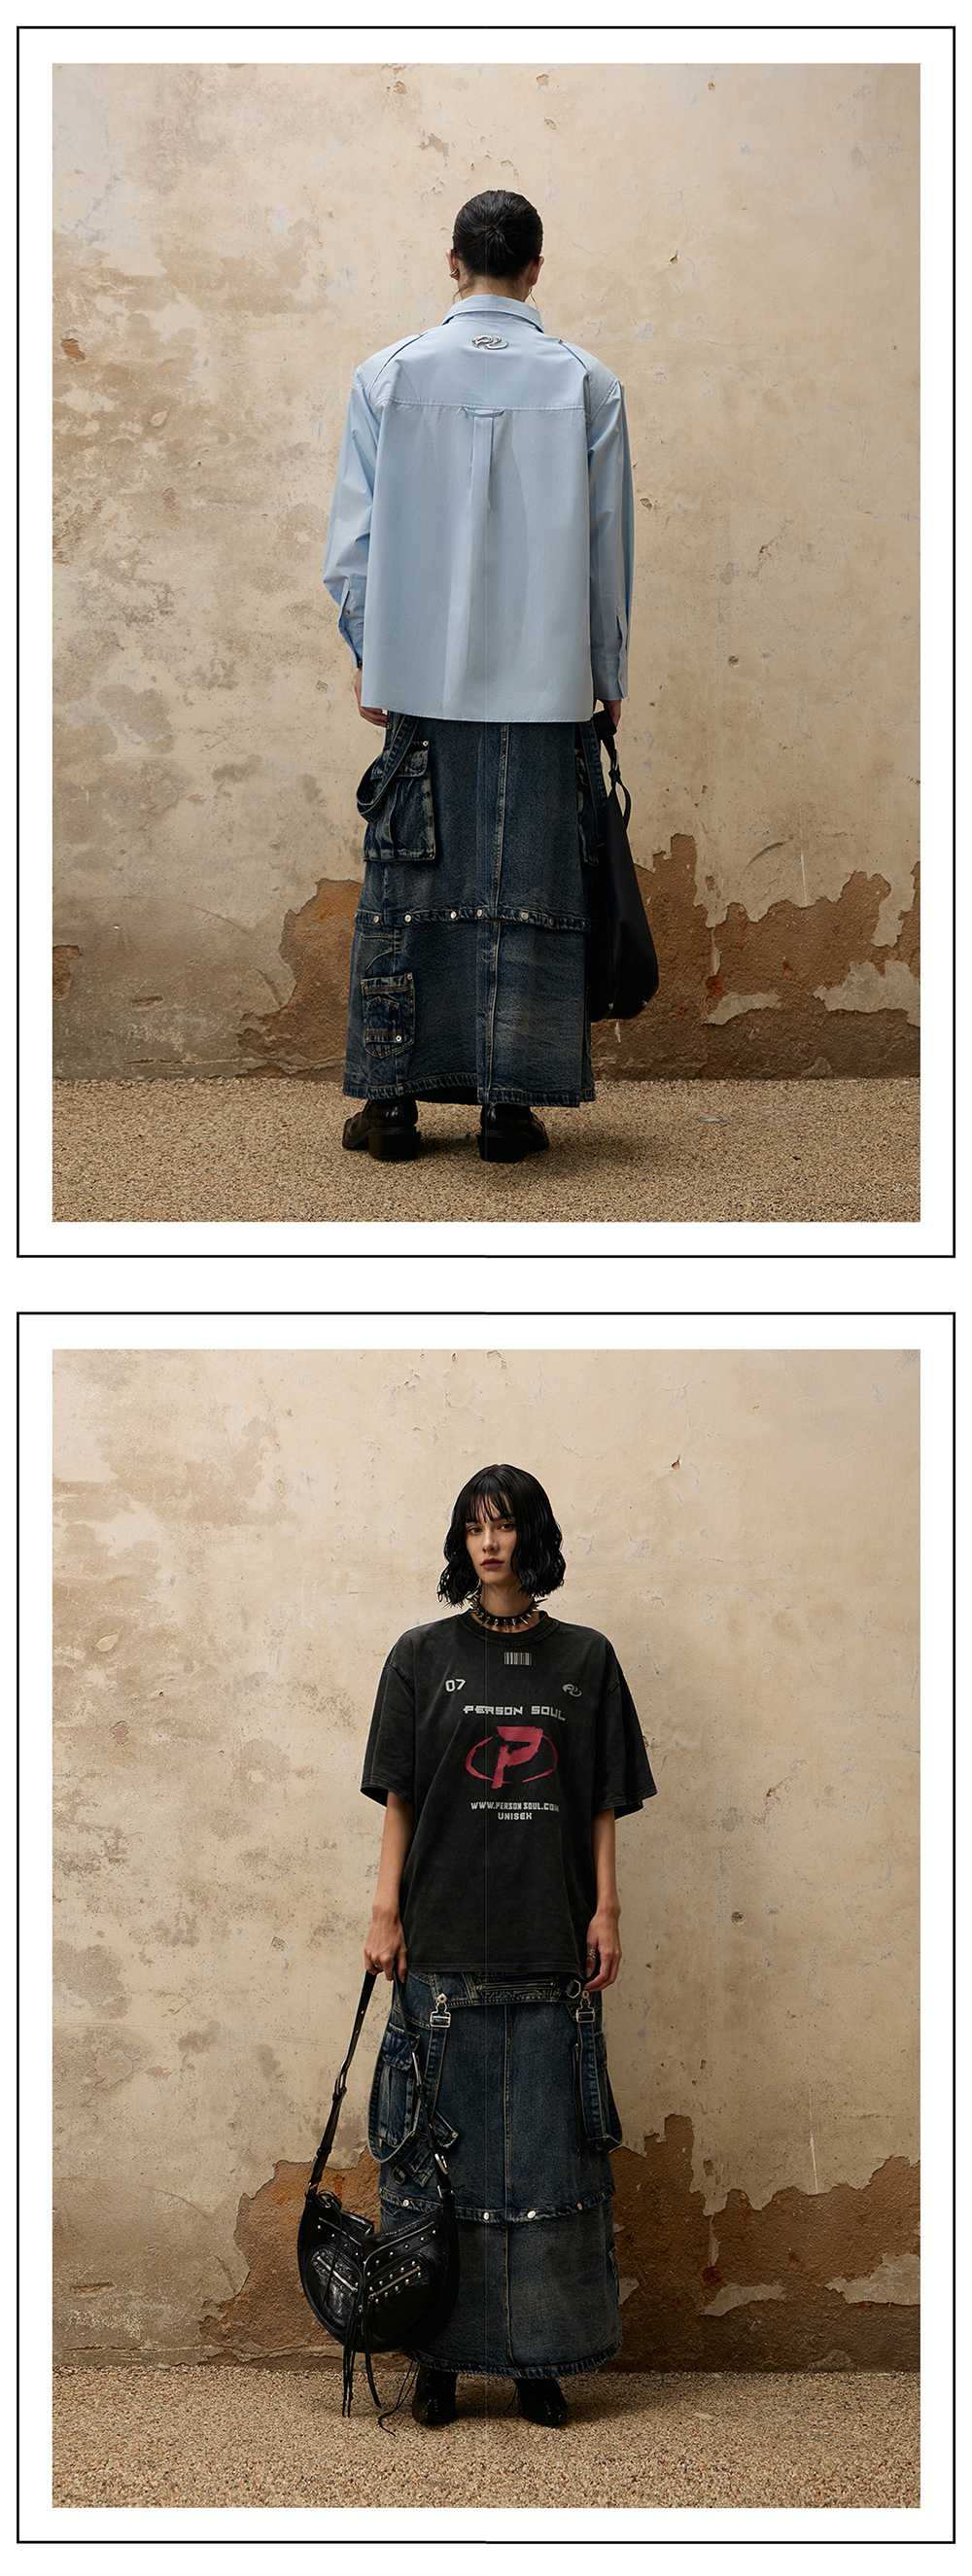 PERSONSOUL] Maxi Denim Dungarees Skirt - 430 ARCHIVE